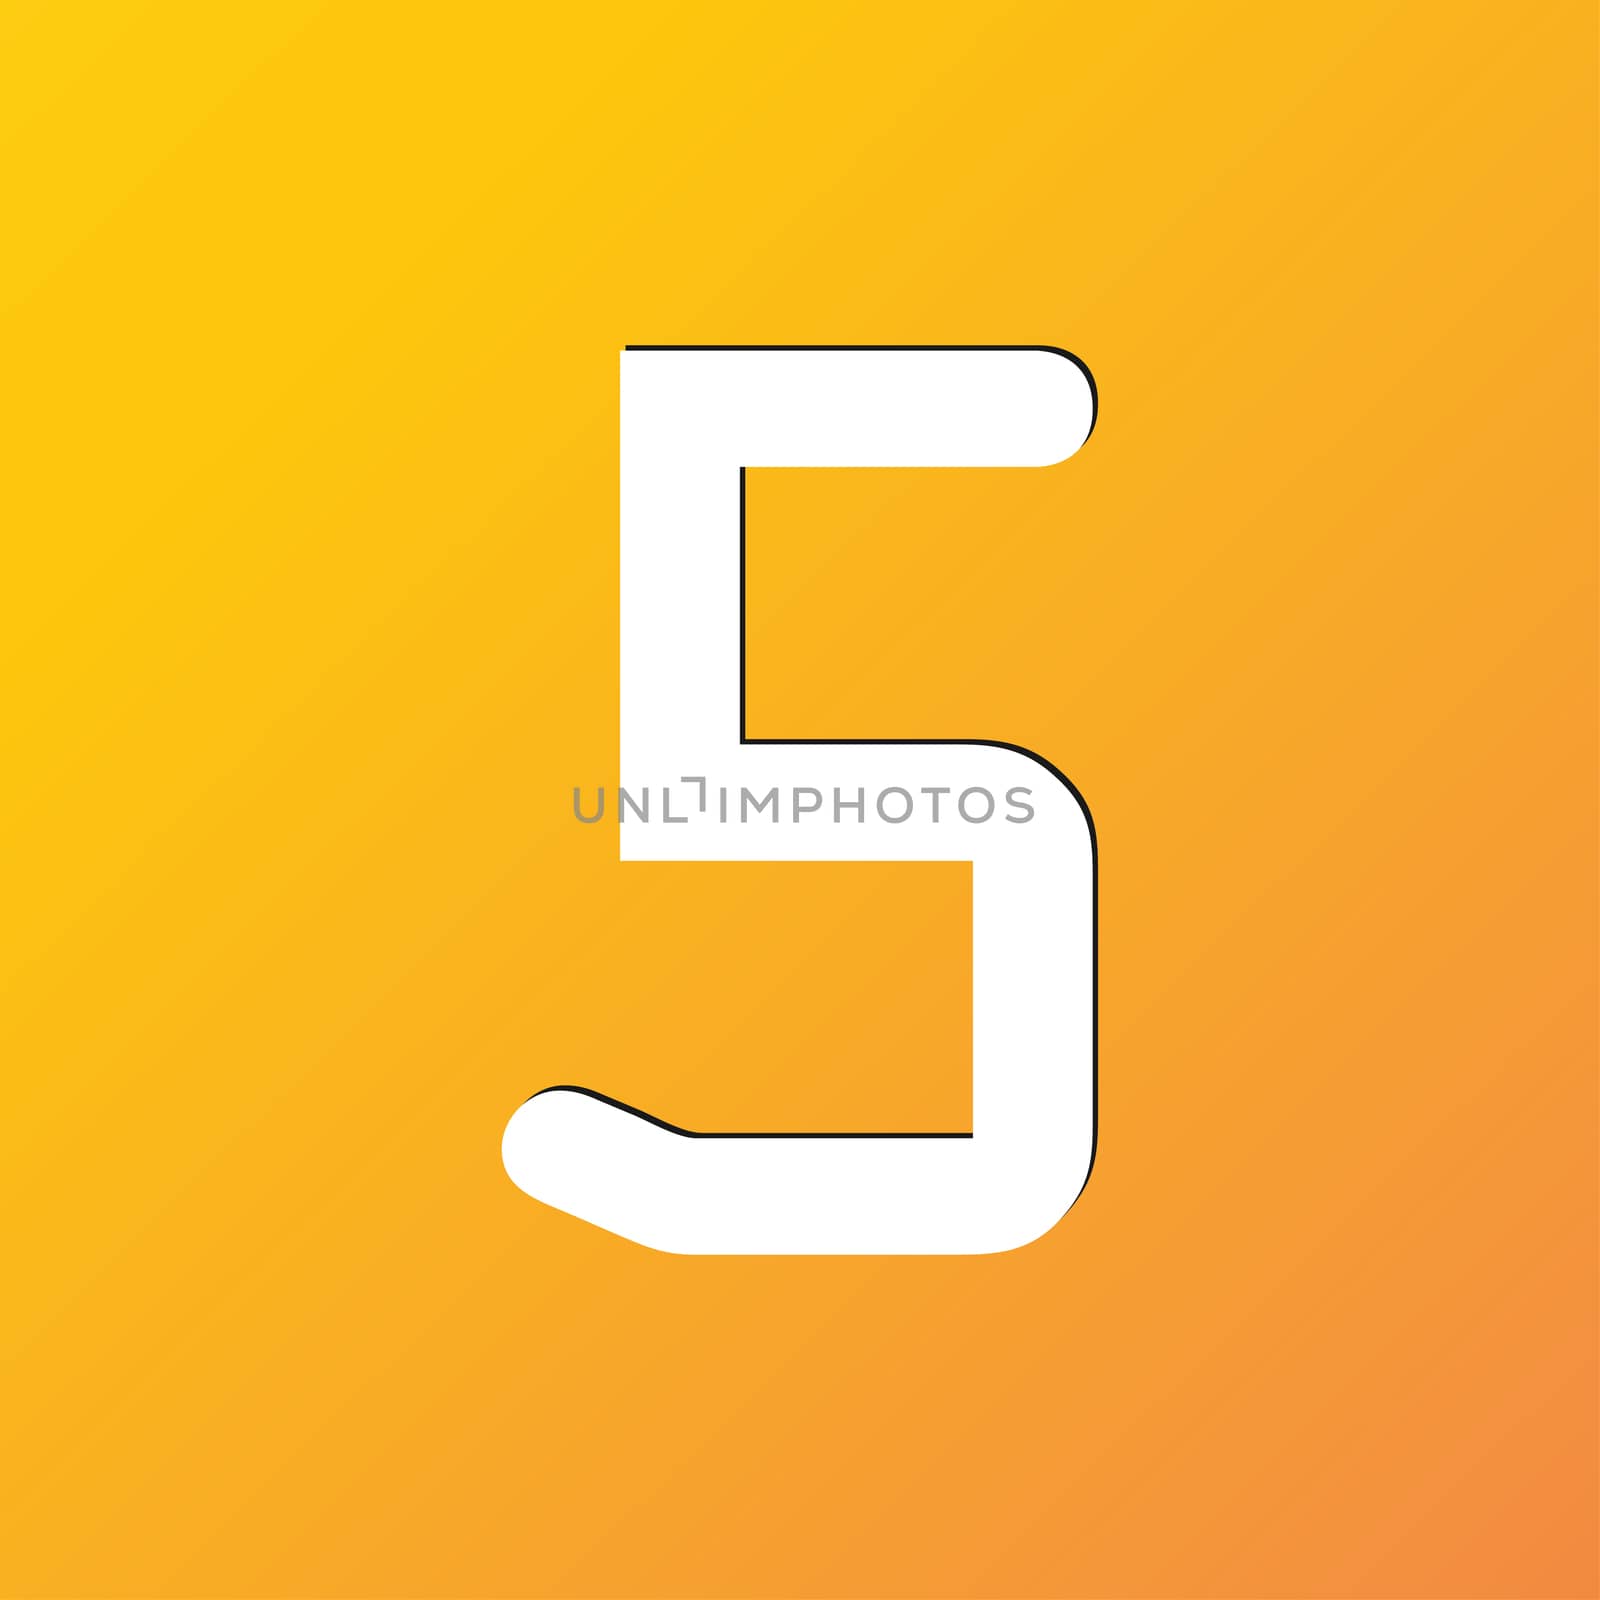 number five icon symbol Flat modern web design with long shadow and space for your text. illustration